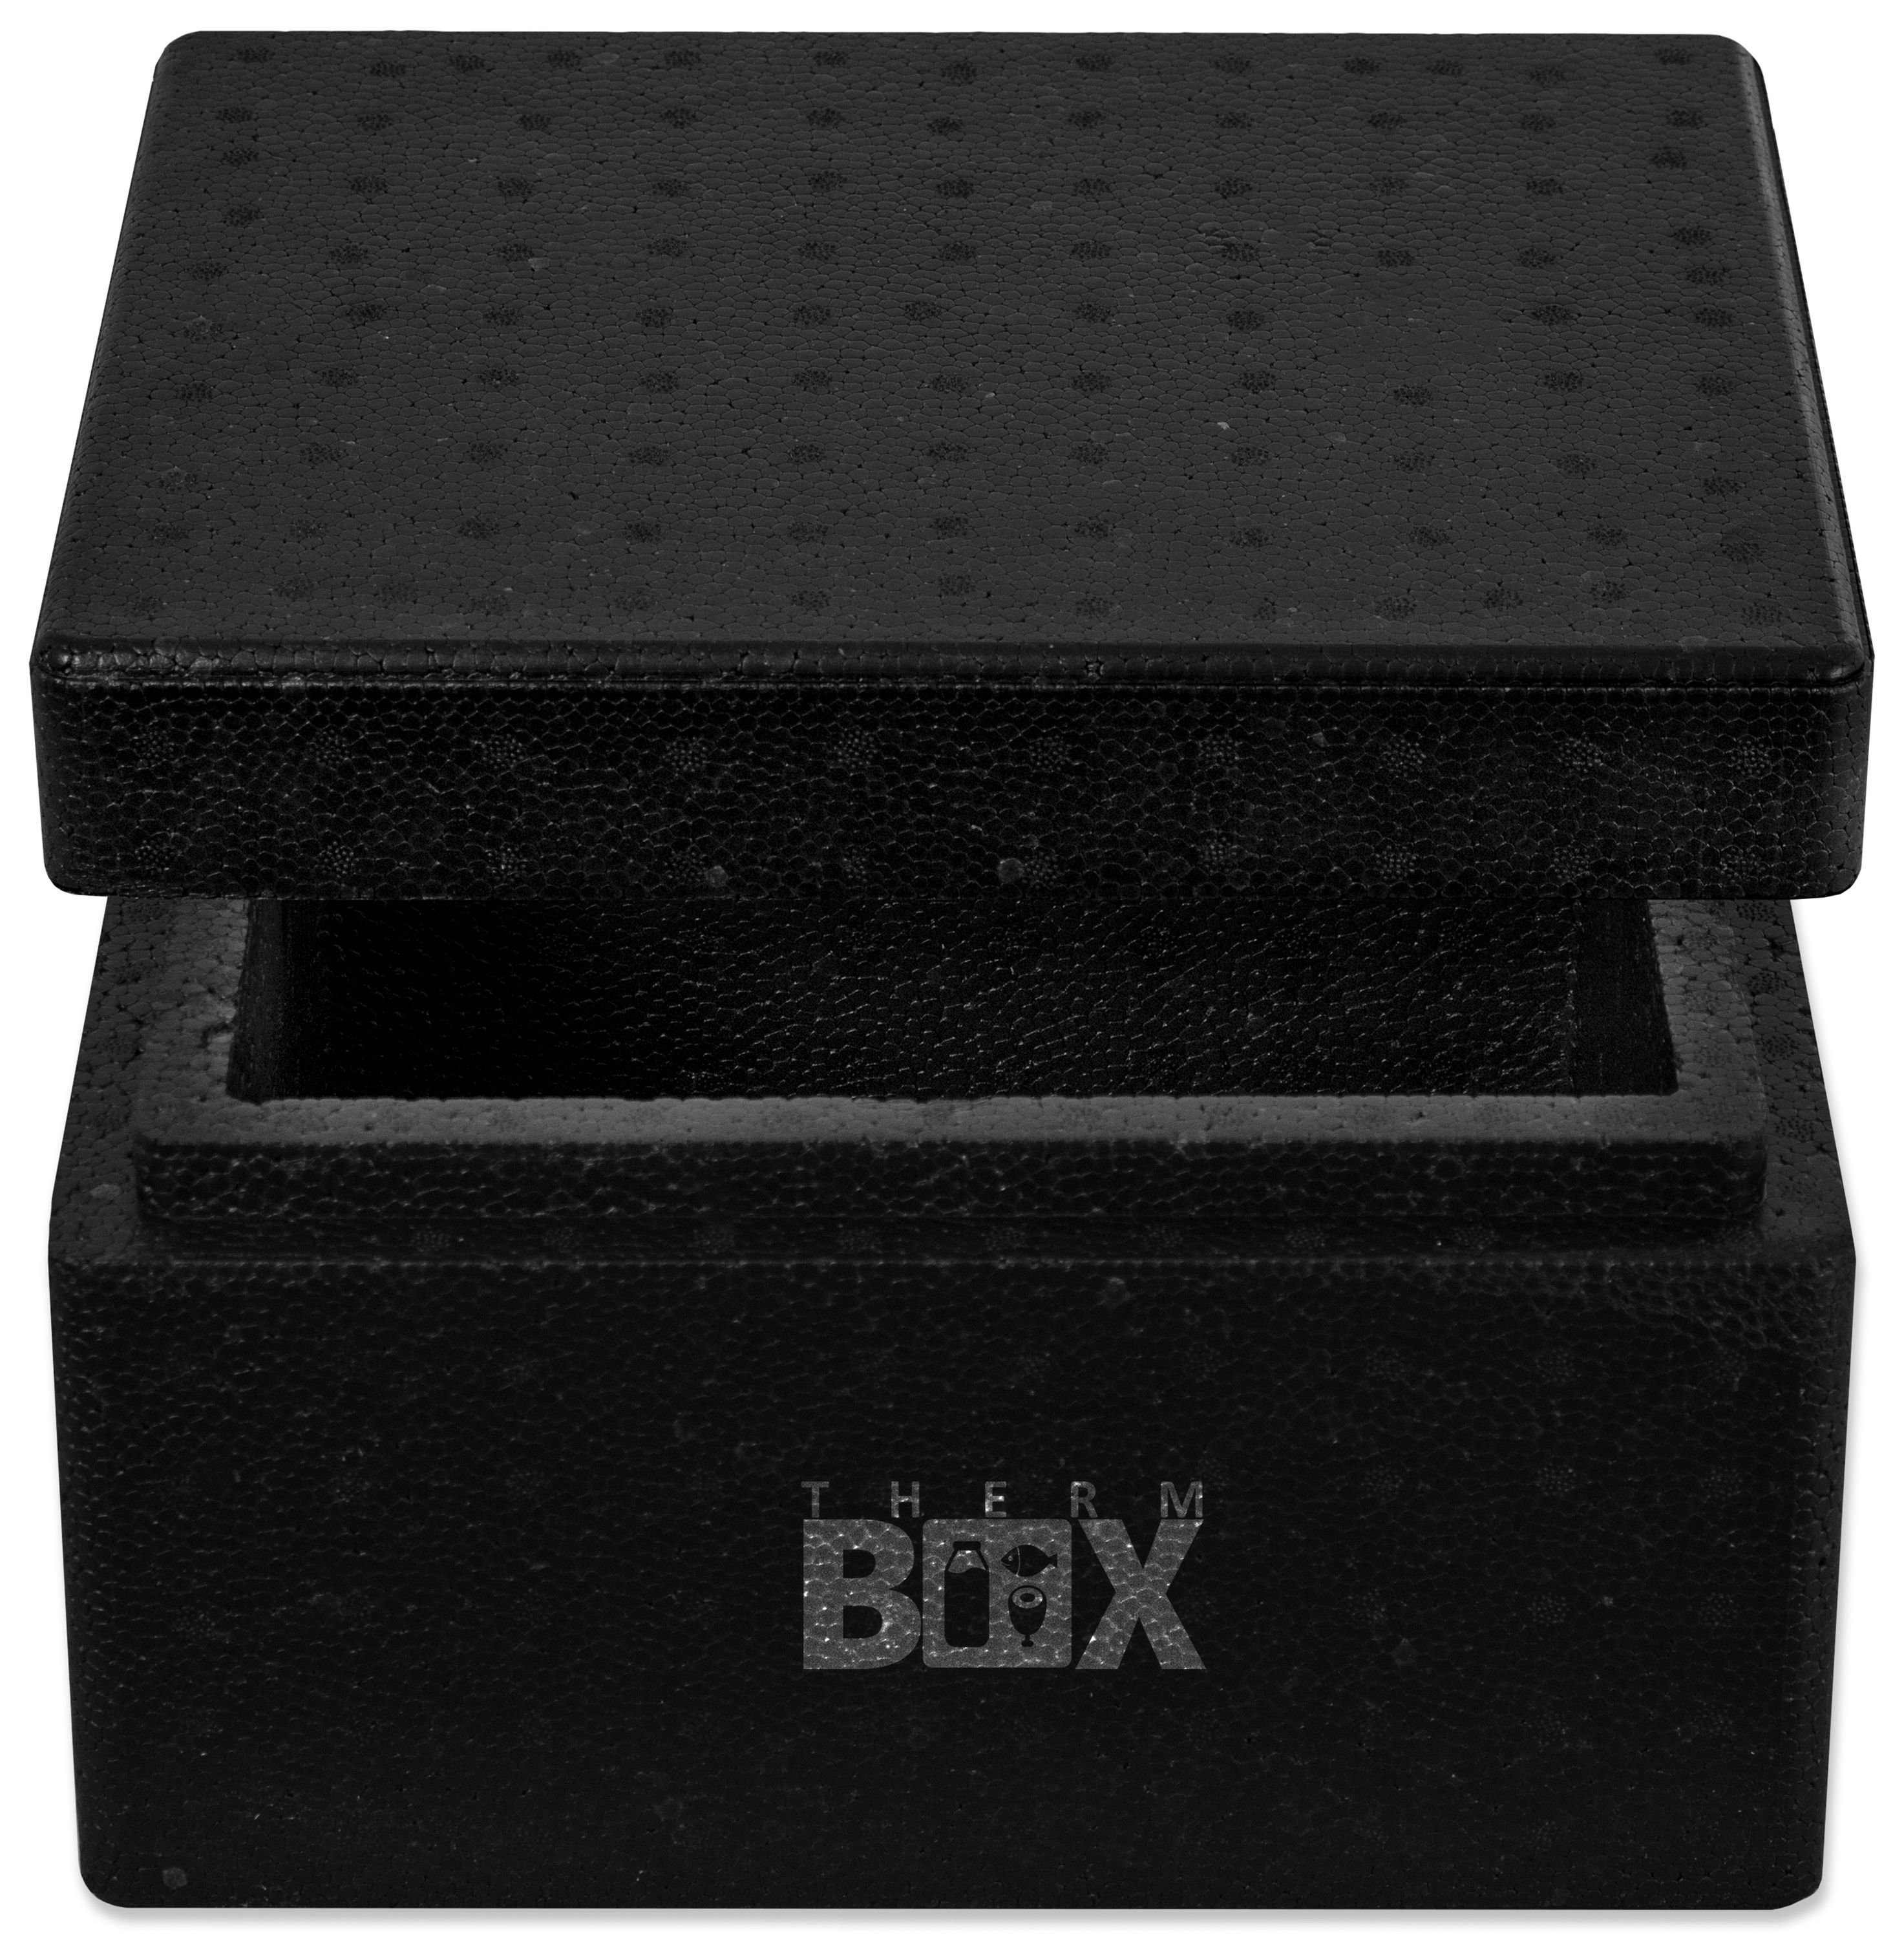 3,6 L Styroporbox Transportbox Thermobox Isolierbox 27 x 22 x 19